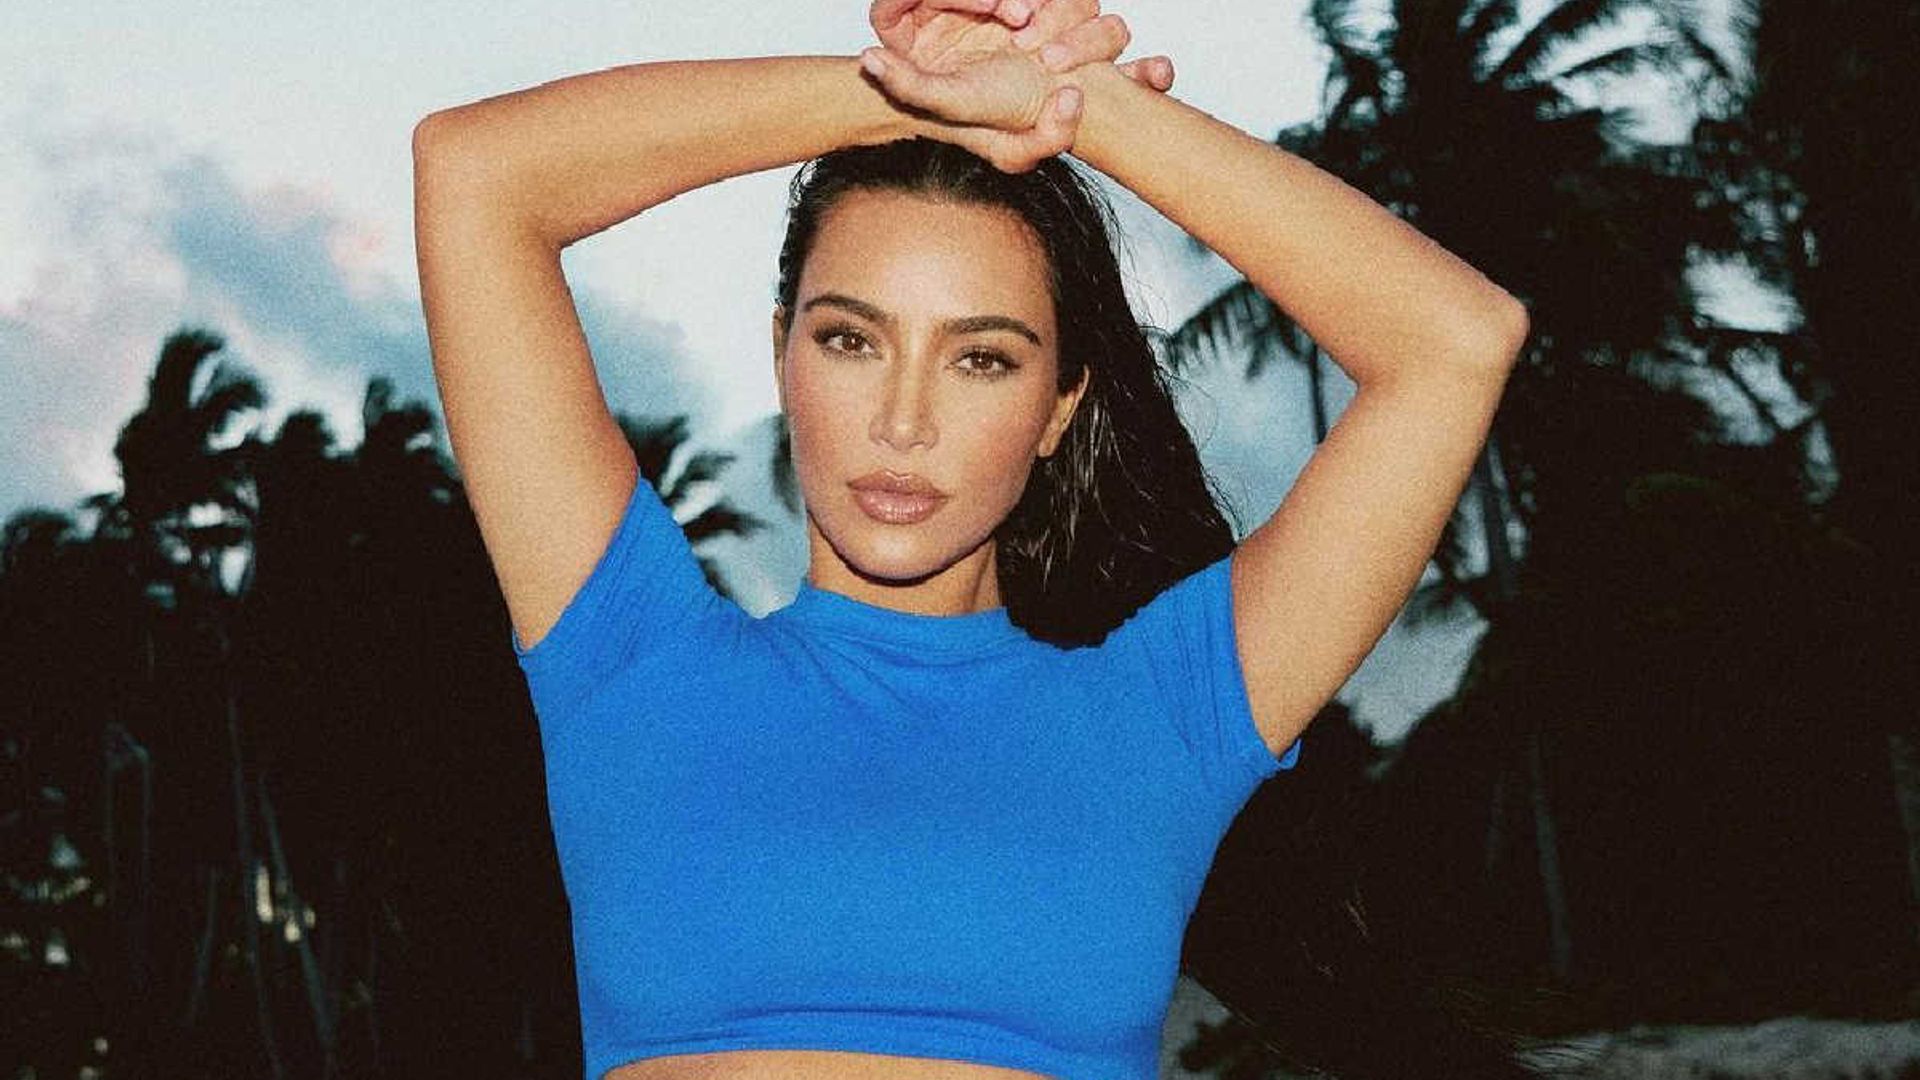 Kim Kardashian's SKIMS swimwear dropped just in time for your vacay - but it's selling out